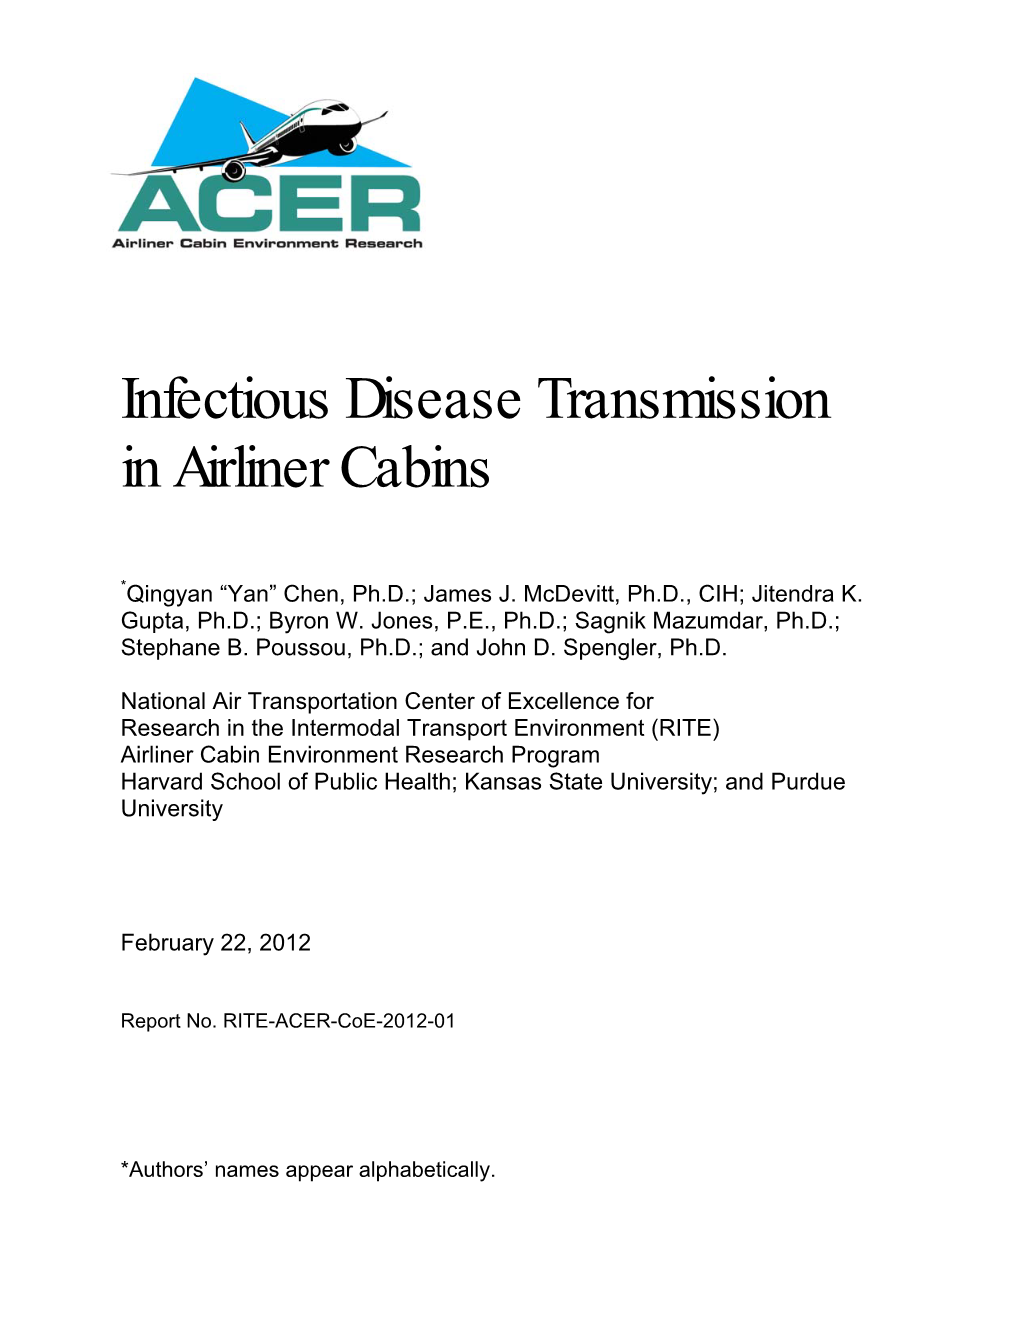 Infectious Disease Transmission in Airliner Cabins